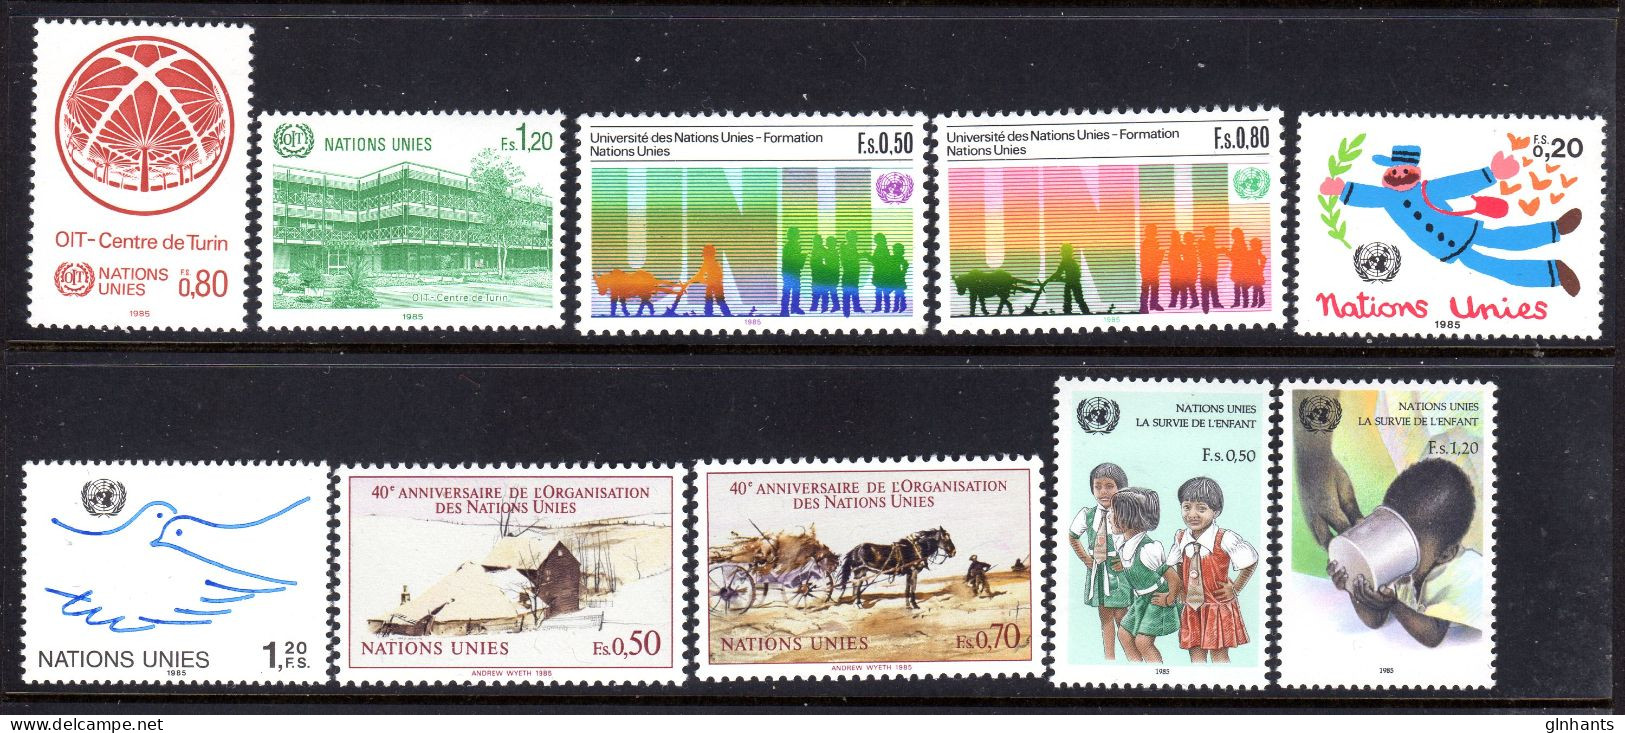 UNITED NATIONS UN GENEVA - 1985 COMPLETE YEAR SET (10V) AS PICTURED FINE MNH ** SG G129-G136, G138-G139 - Neufs